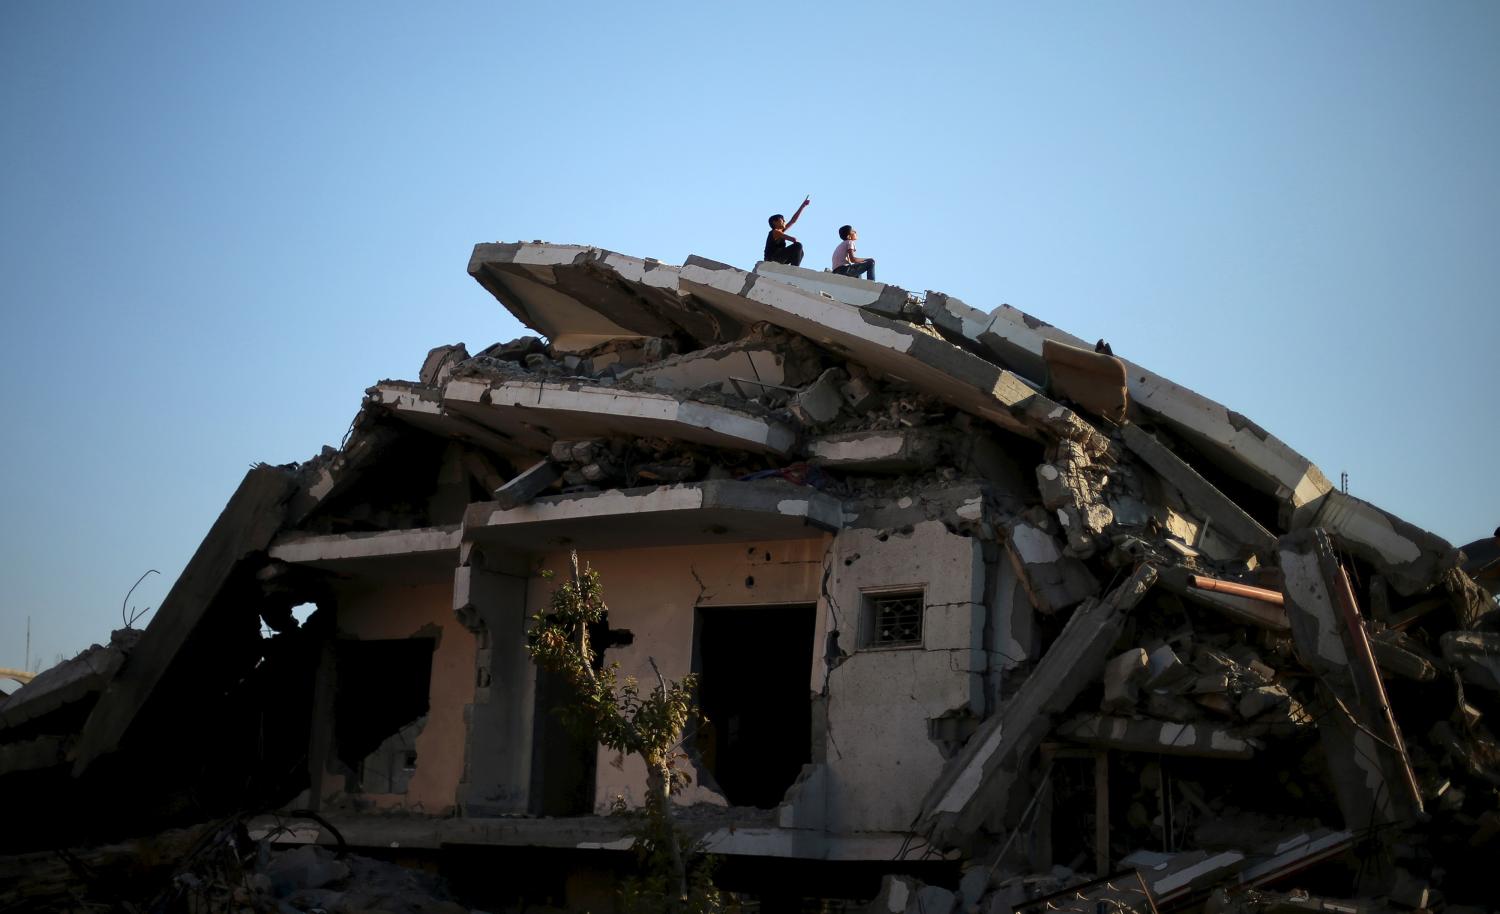 Palestinian boys sit atop the ruins of a house that witnesses said was destroyed by Israeli shelling during a 50-day war last summer, in the east of Gaza City May 12, 2015. REUTERS/Mohammed Salem       TPX IMAGES OF THE DAY      - GF10000092322